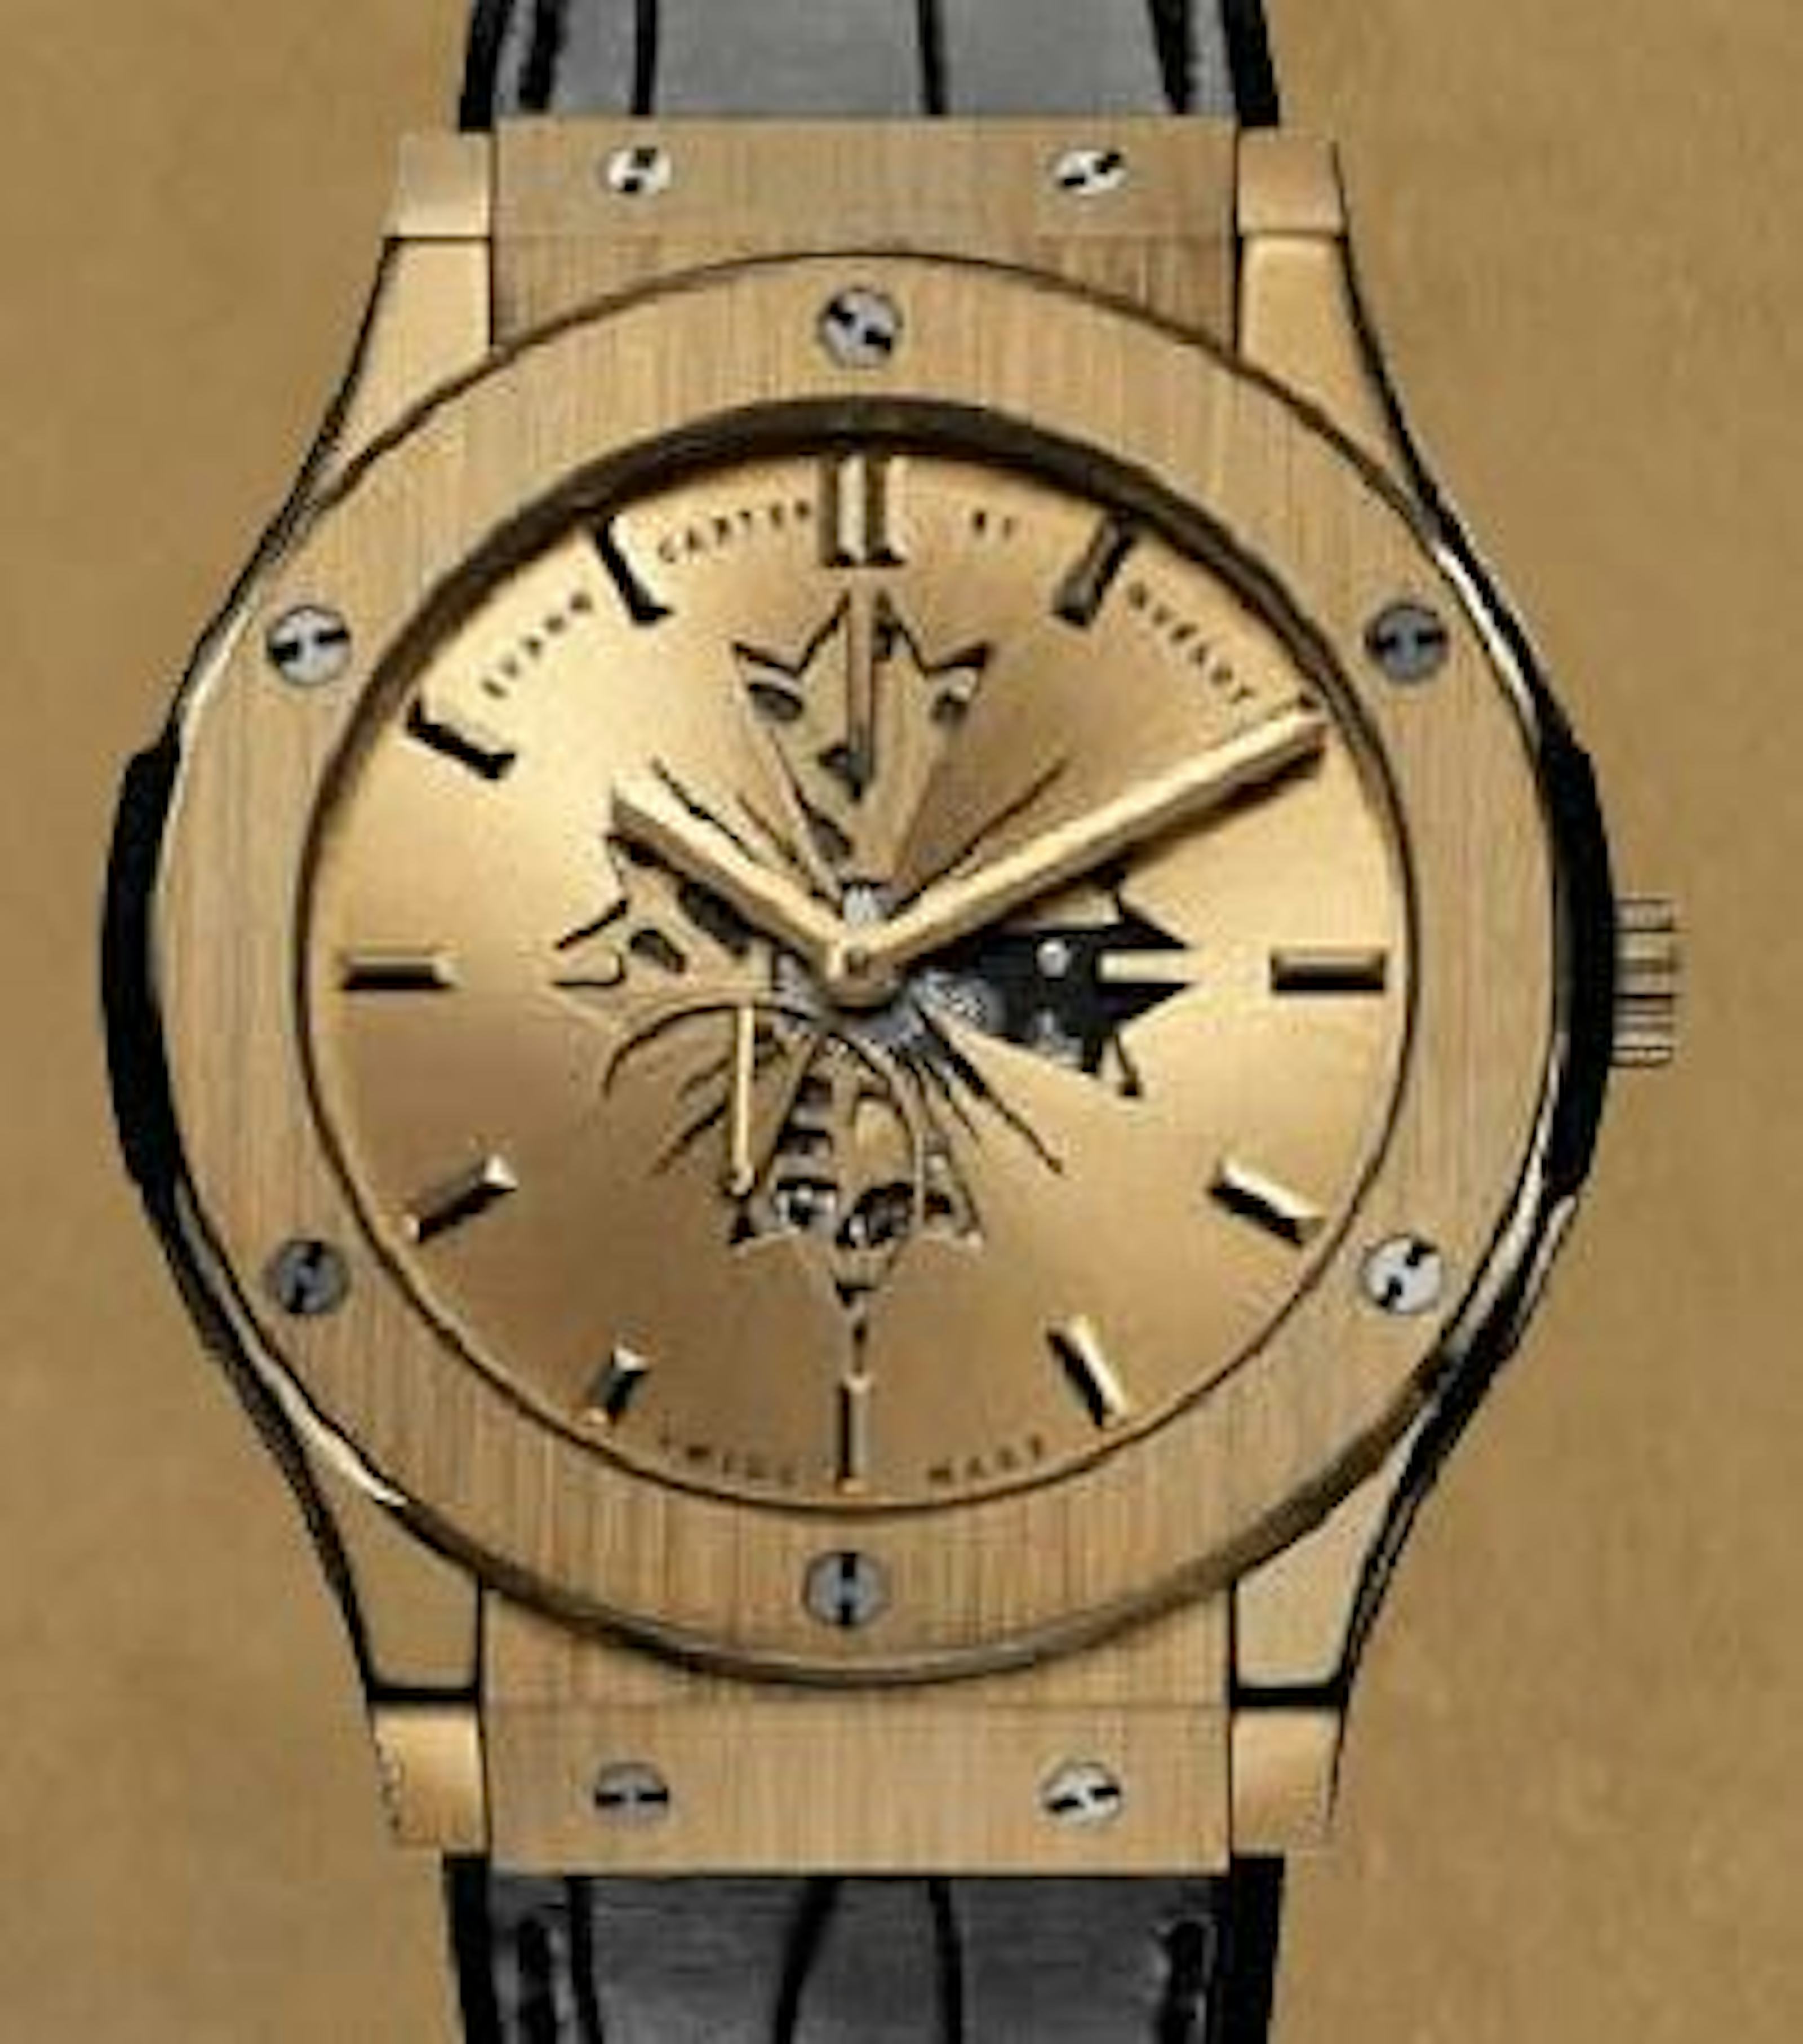 Jay-Z: Fusion for a Foundation Hublot Collaboration